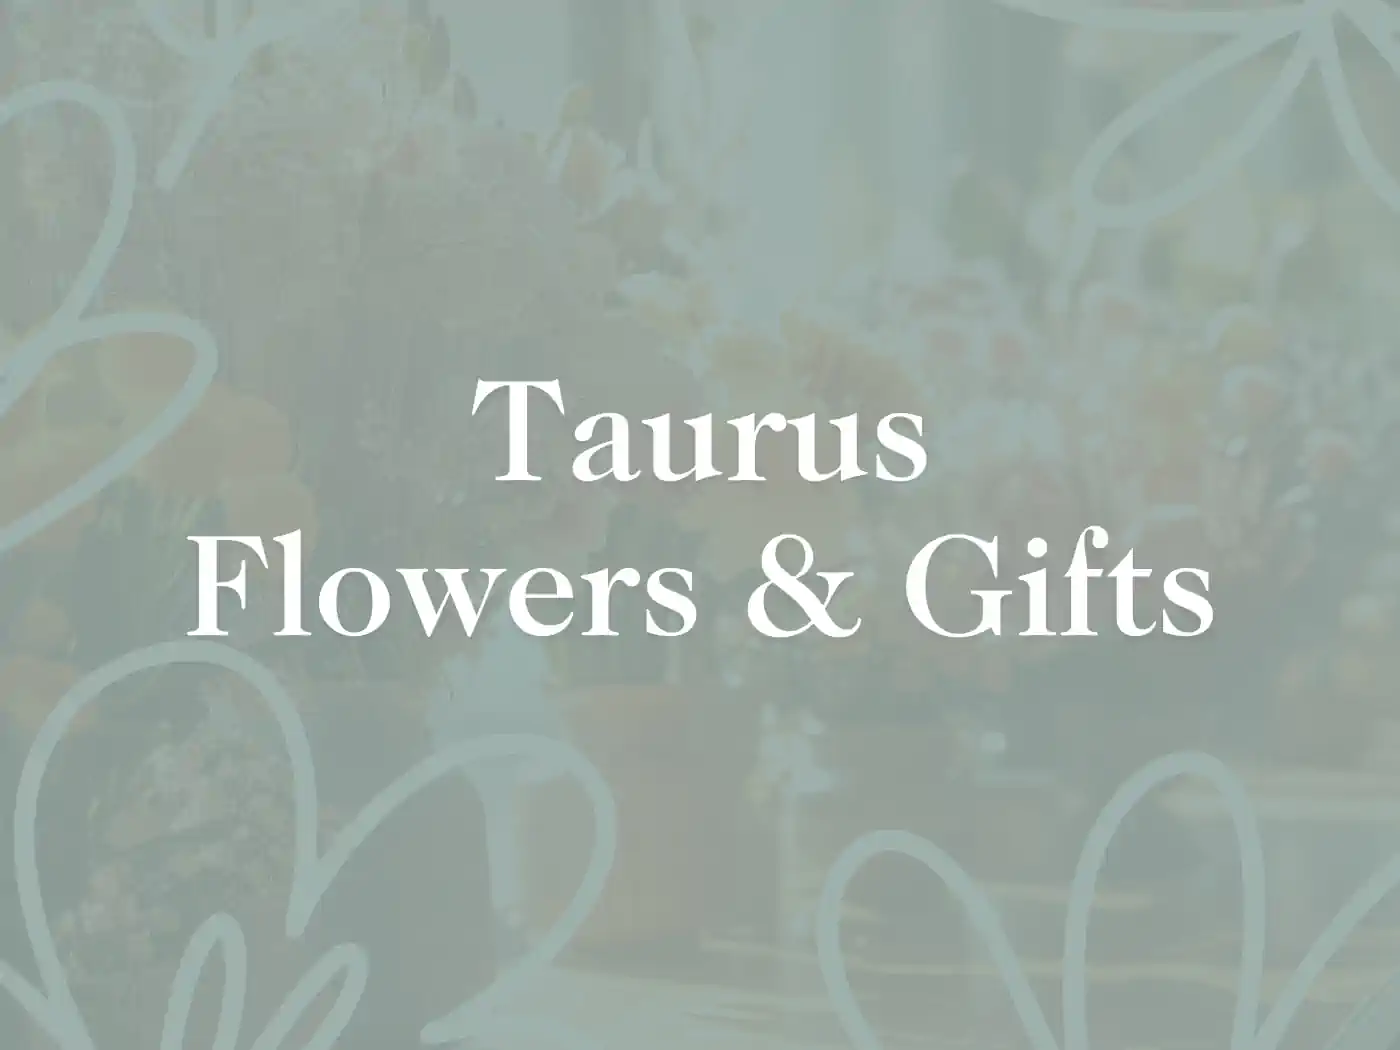 A soft-focus background featuring a floral arrangement with the text "Taurus Flowers & Gifts" overlayed. Fabulous Flowers and Gifts. Taurus Flowers & Gifts Collection.